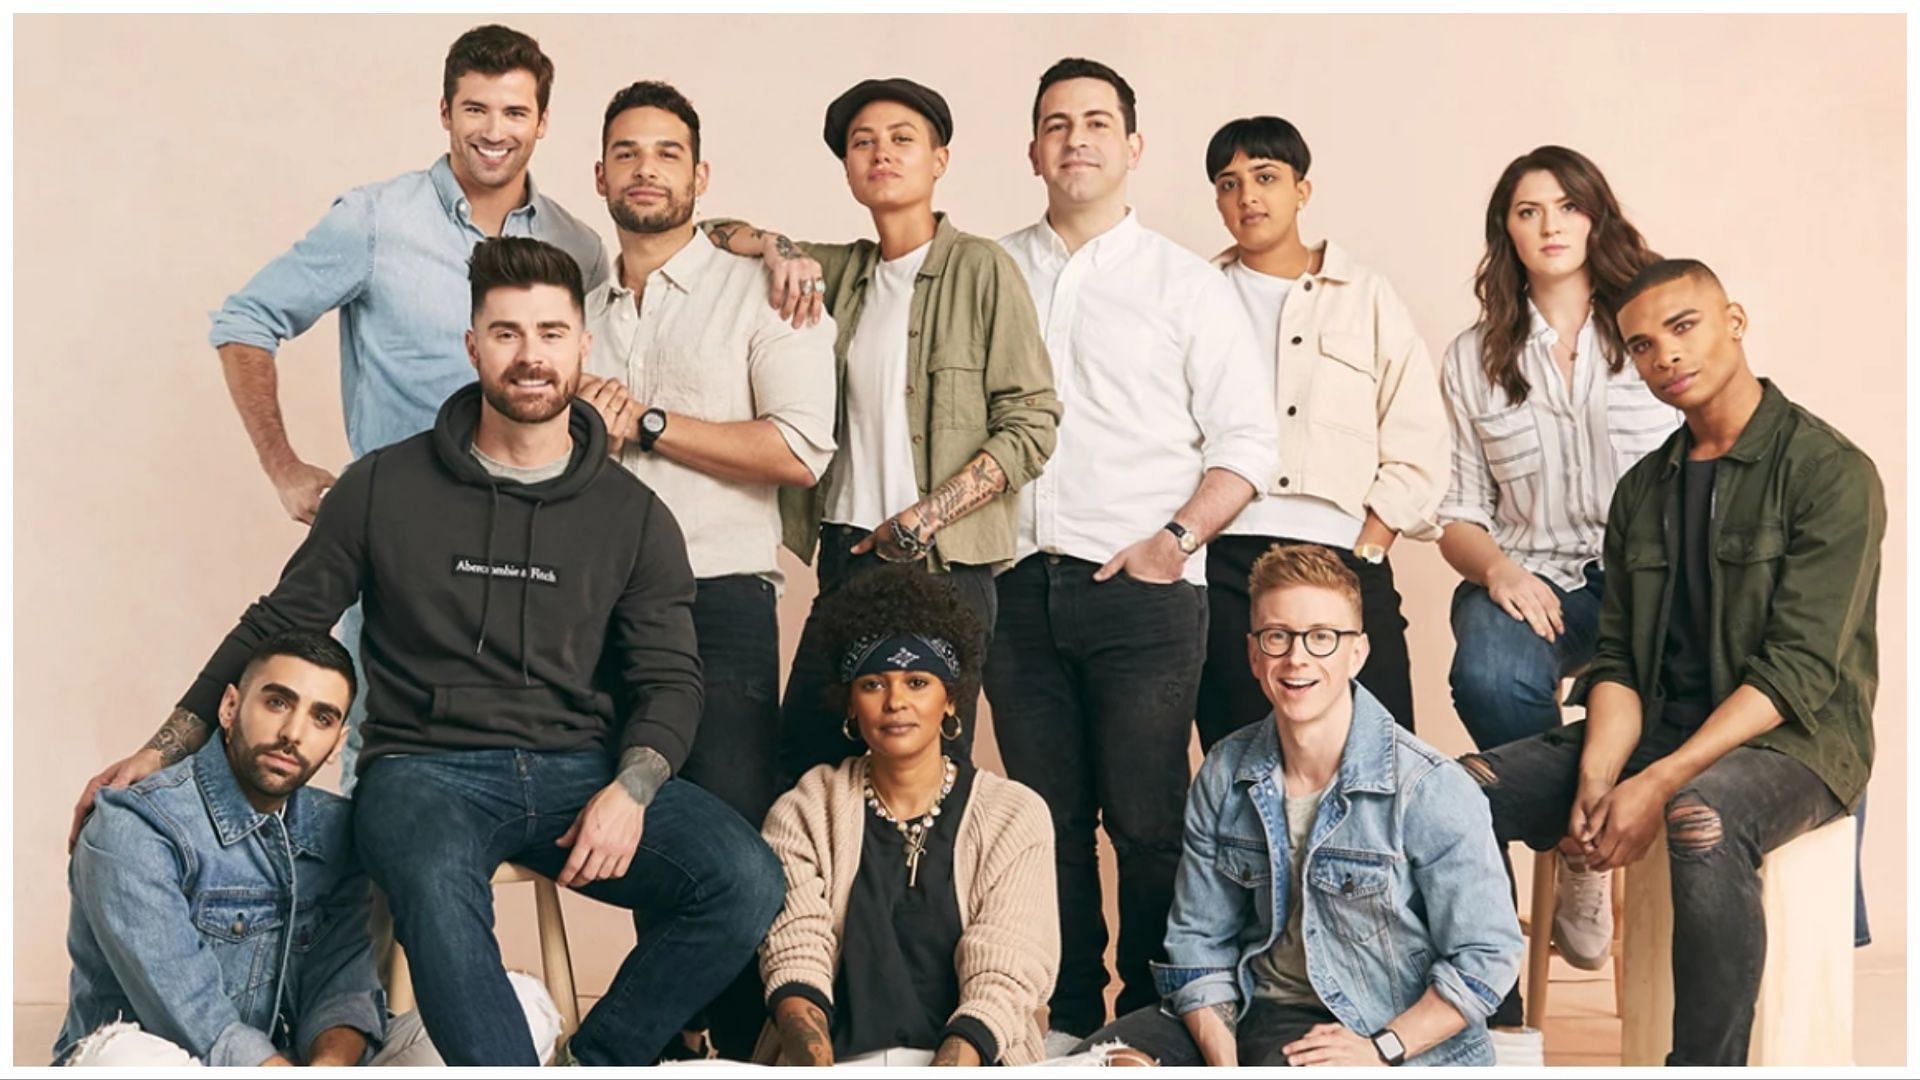 Abercrombie &amp; Fitch face backlash for their LGBTQ ad campaign (Image via Abercrombie)